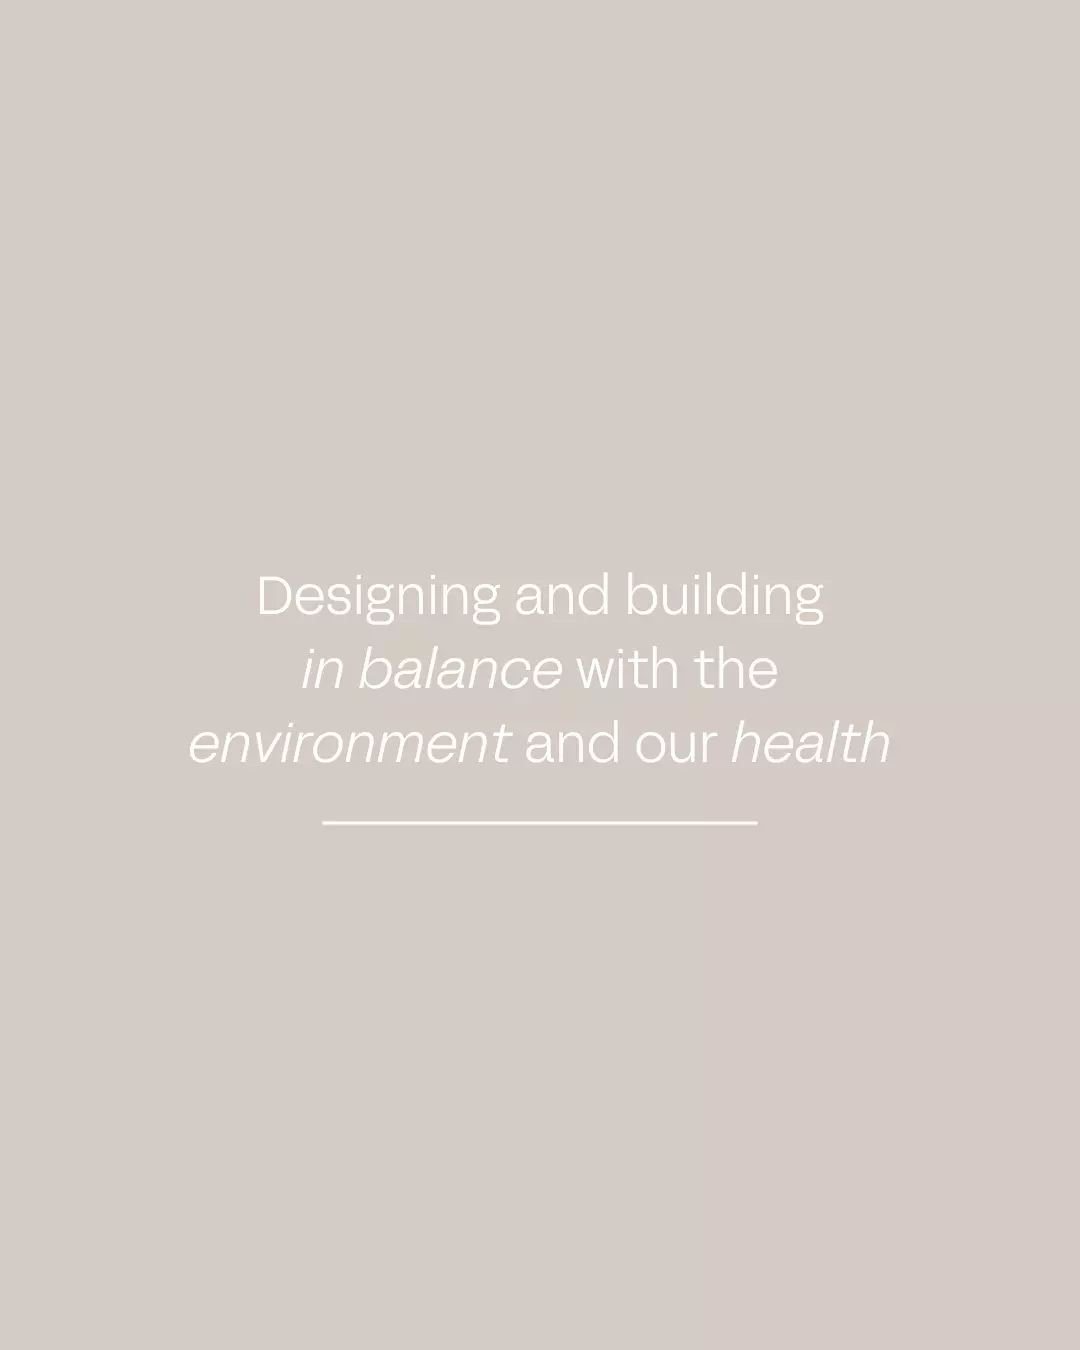 We feel a responsibility to inspire change in designing and building in balance with the environment and our health. Our vision is to share this knowledge and educate with our architectural work, hopefully inspiring a more sustainable balanced direct